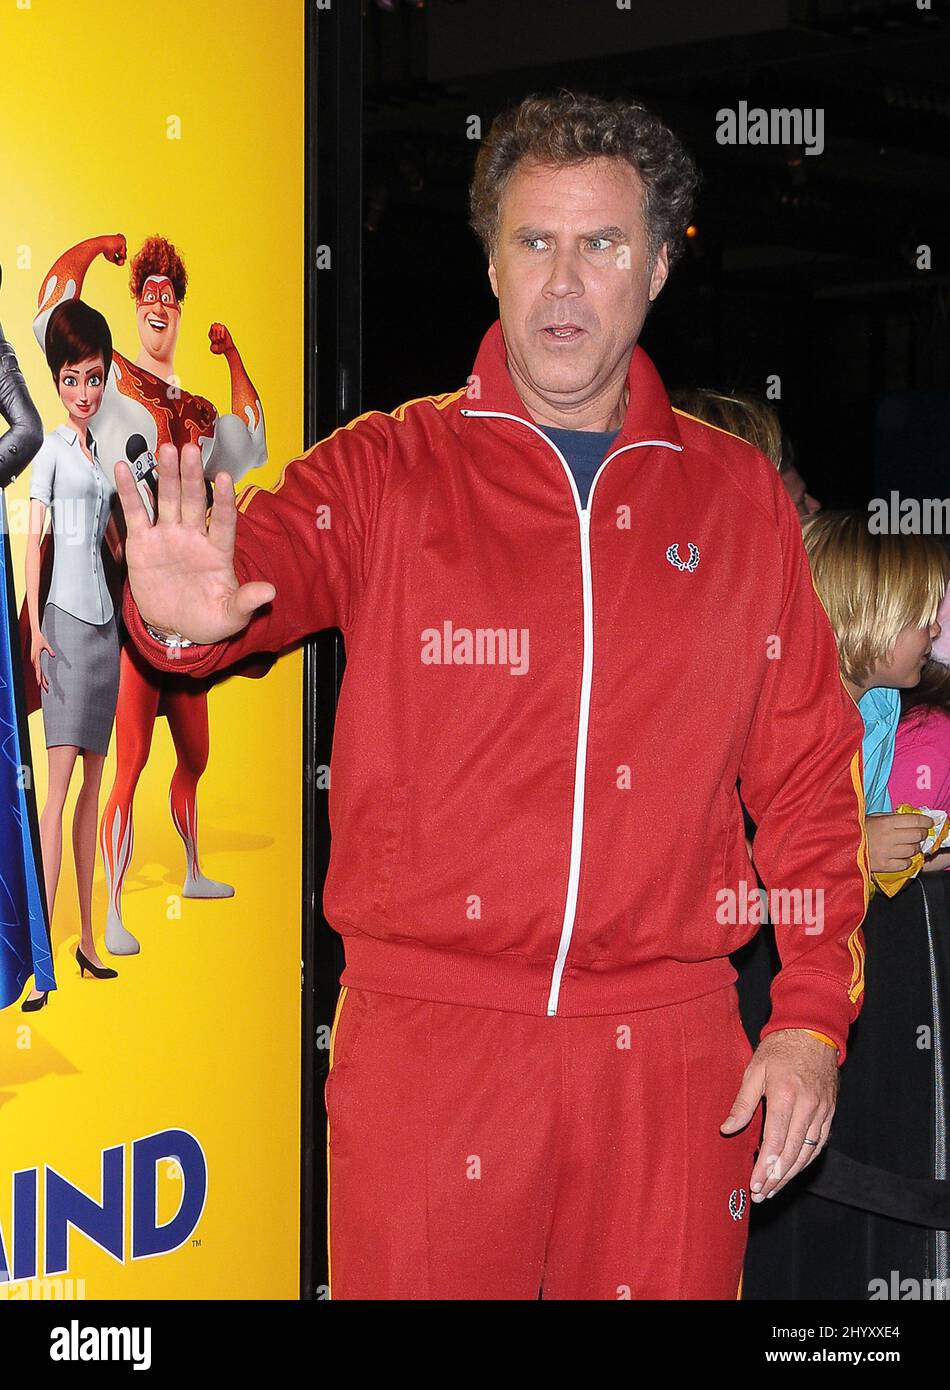 Will Ferrell at the premiere of 'Megamind' held at Mann's Chinese Theatre in Los Angeles, USA. Stock Photo